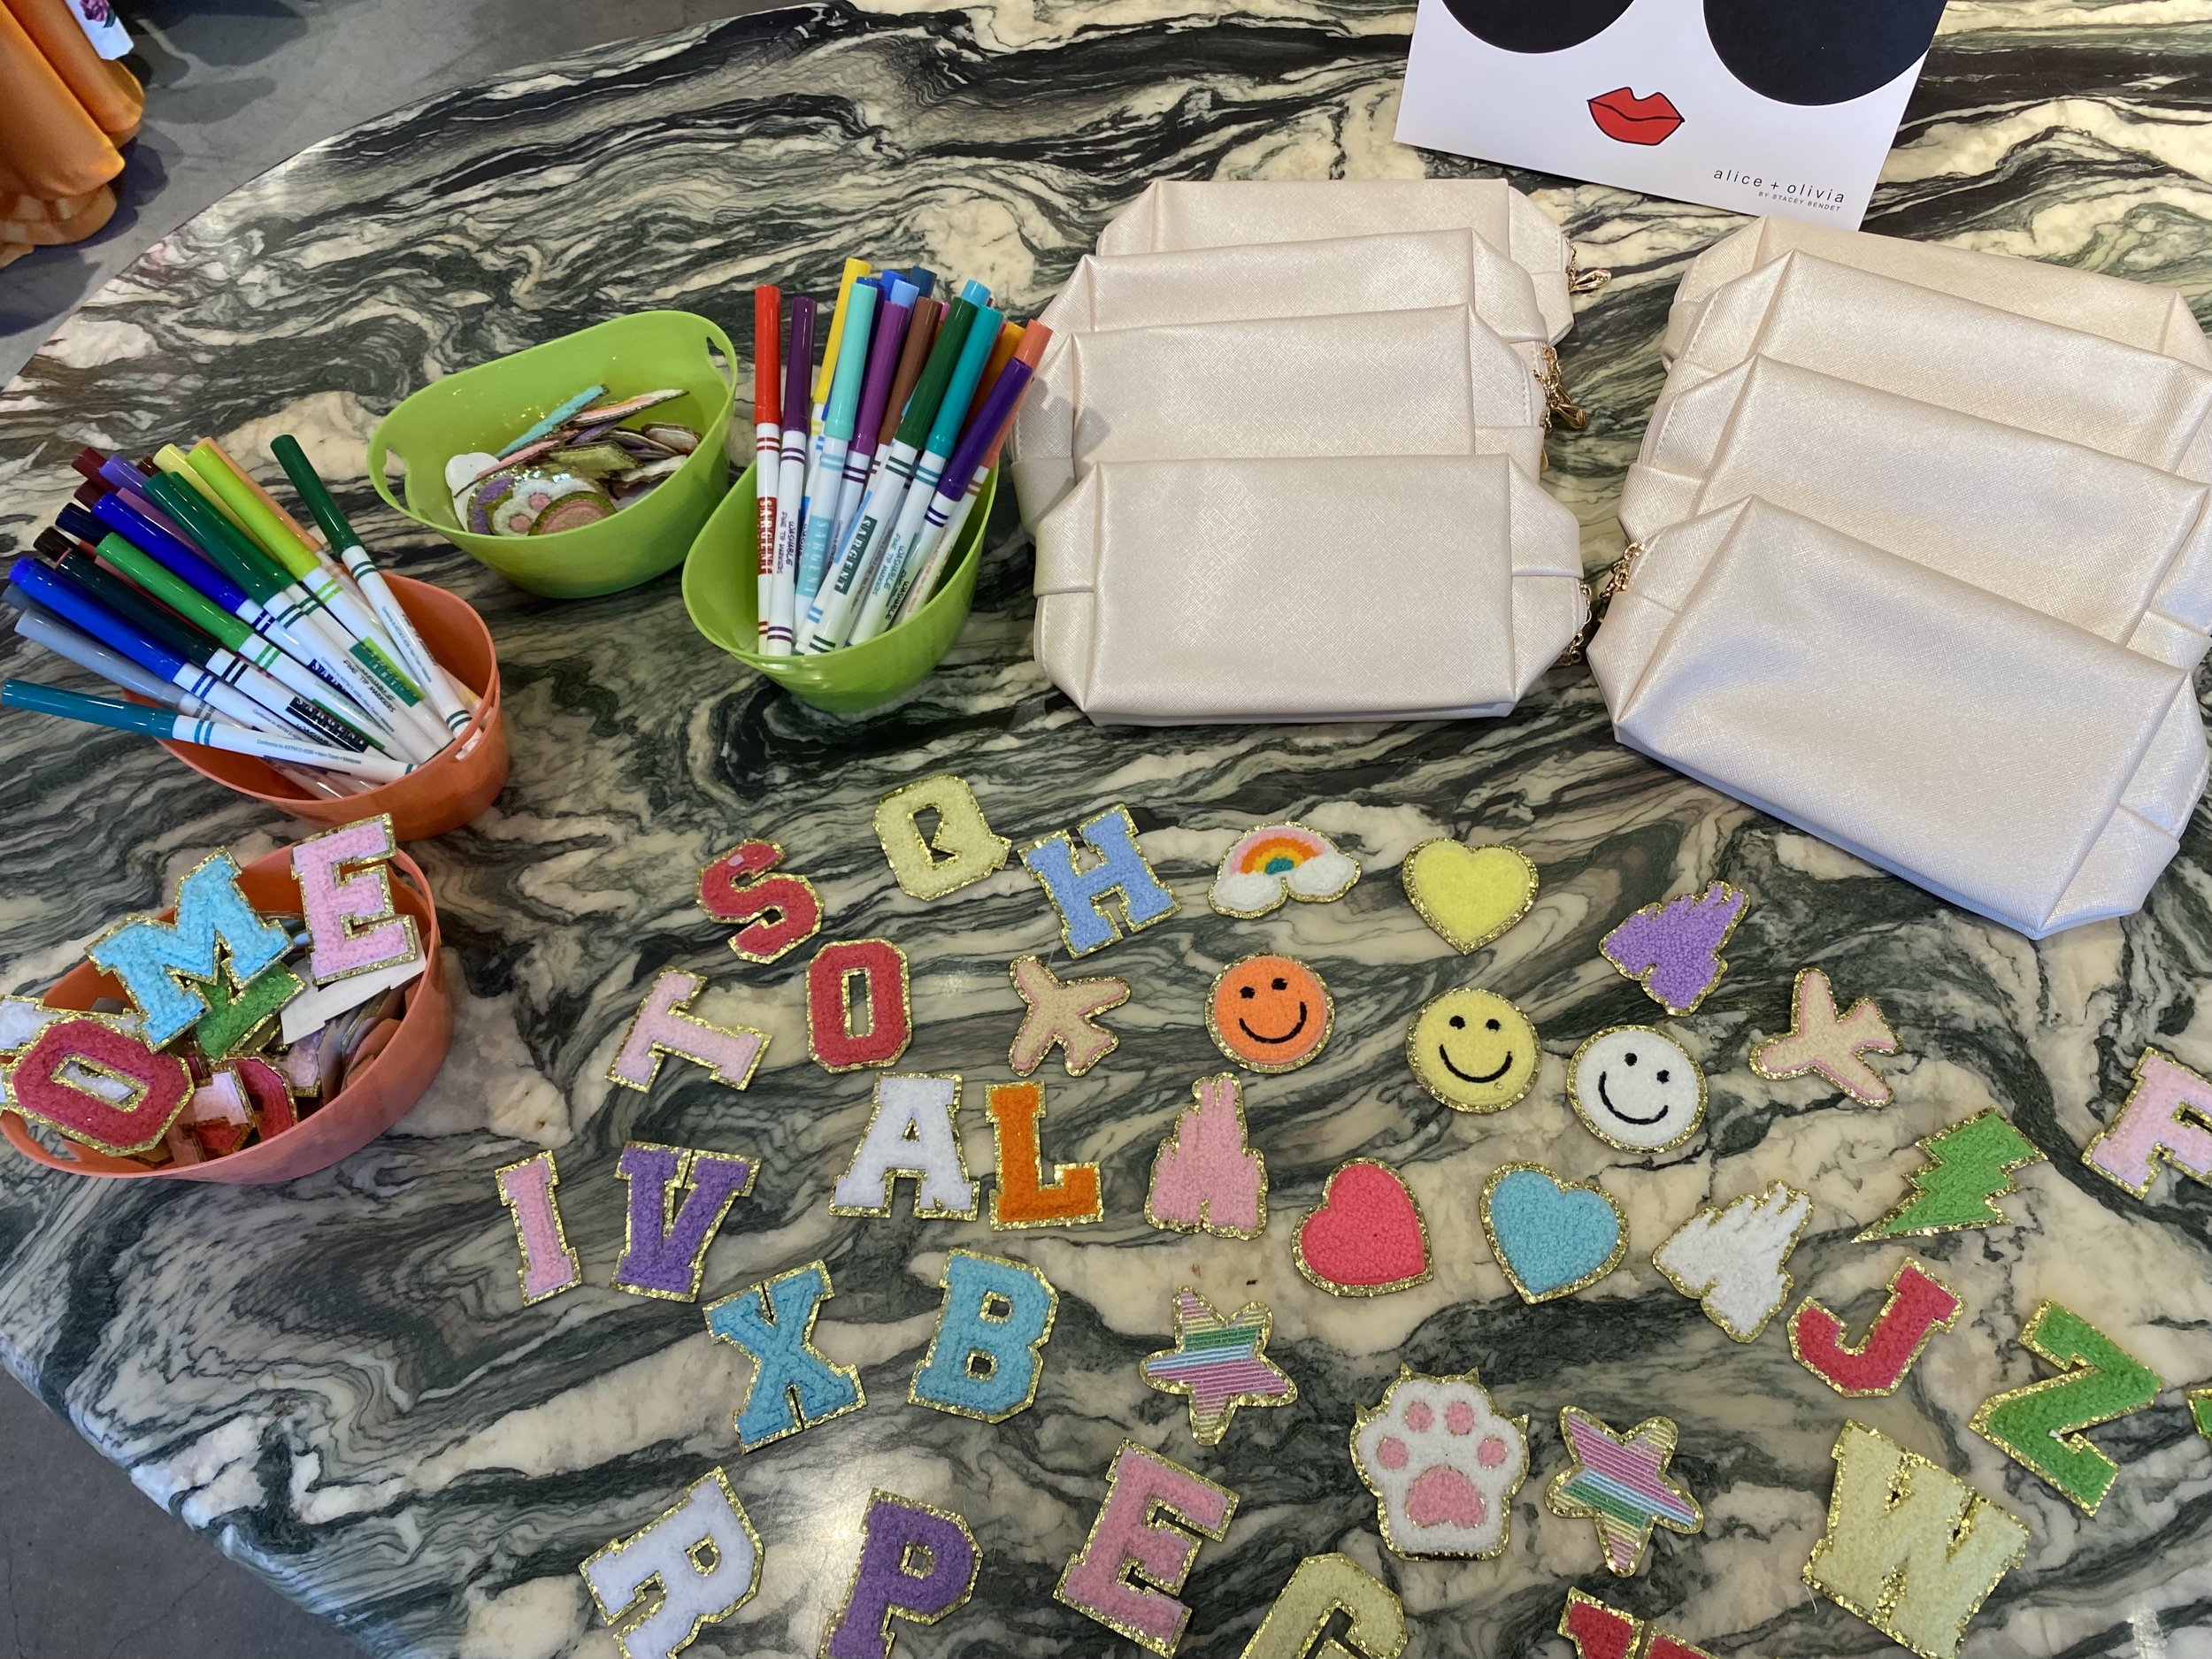 Craft Party with Patches on Pouches in New York City Arts and Crafts.jpg